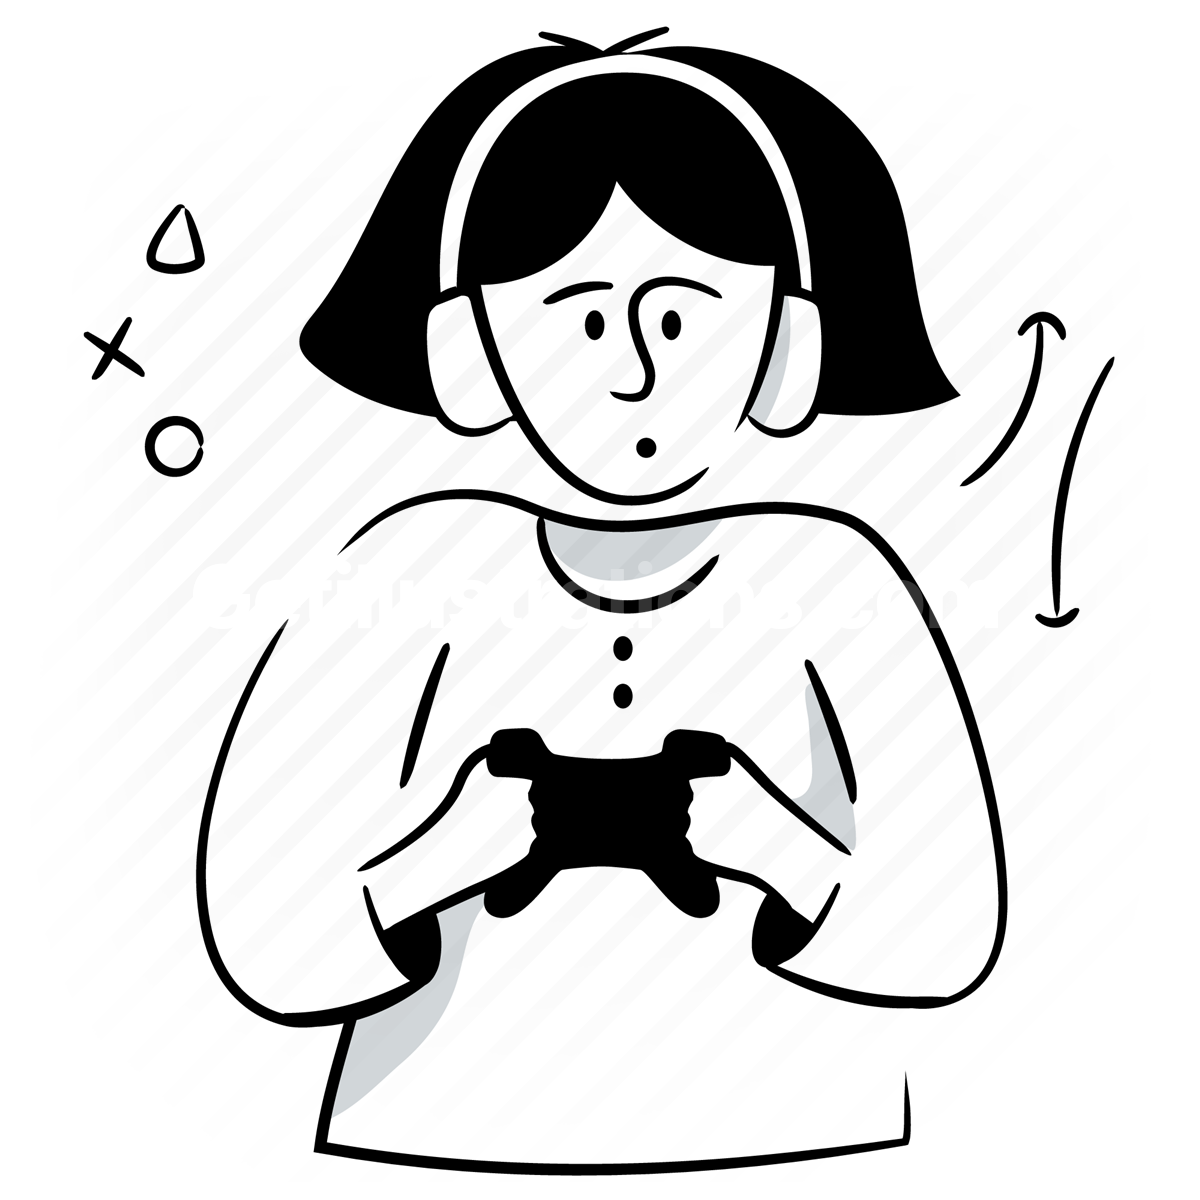 gaming, video game, woman, people, controller, device, headphone, headset